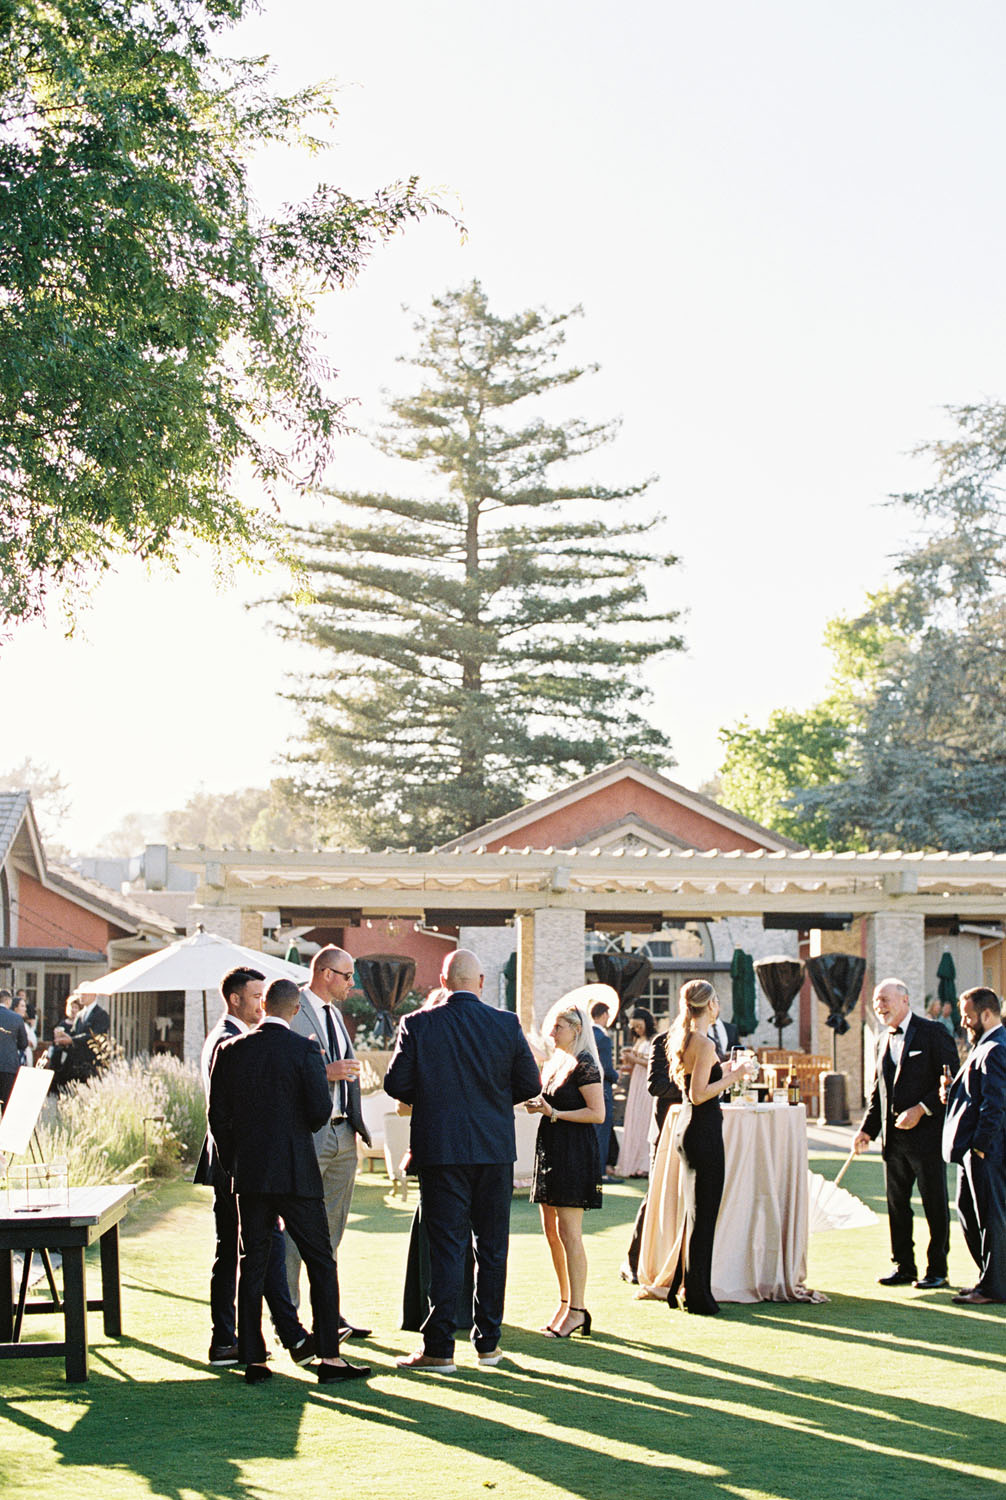 Cocktail hour at Carmel valley wedding